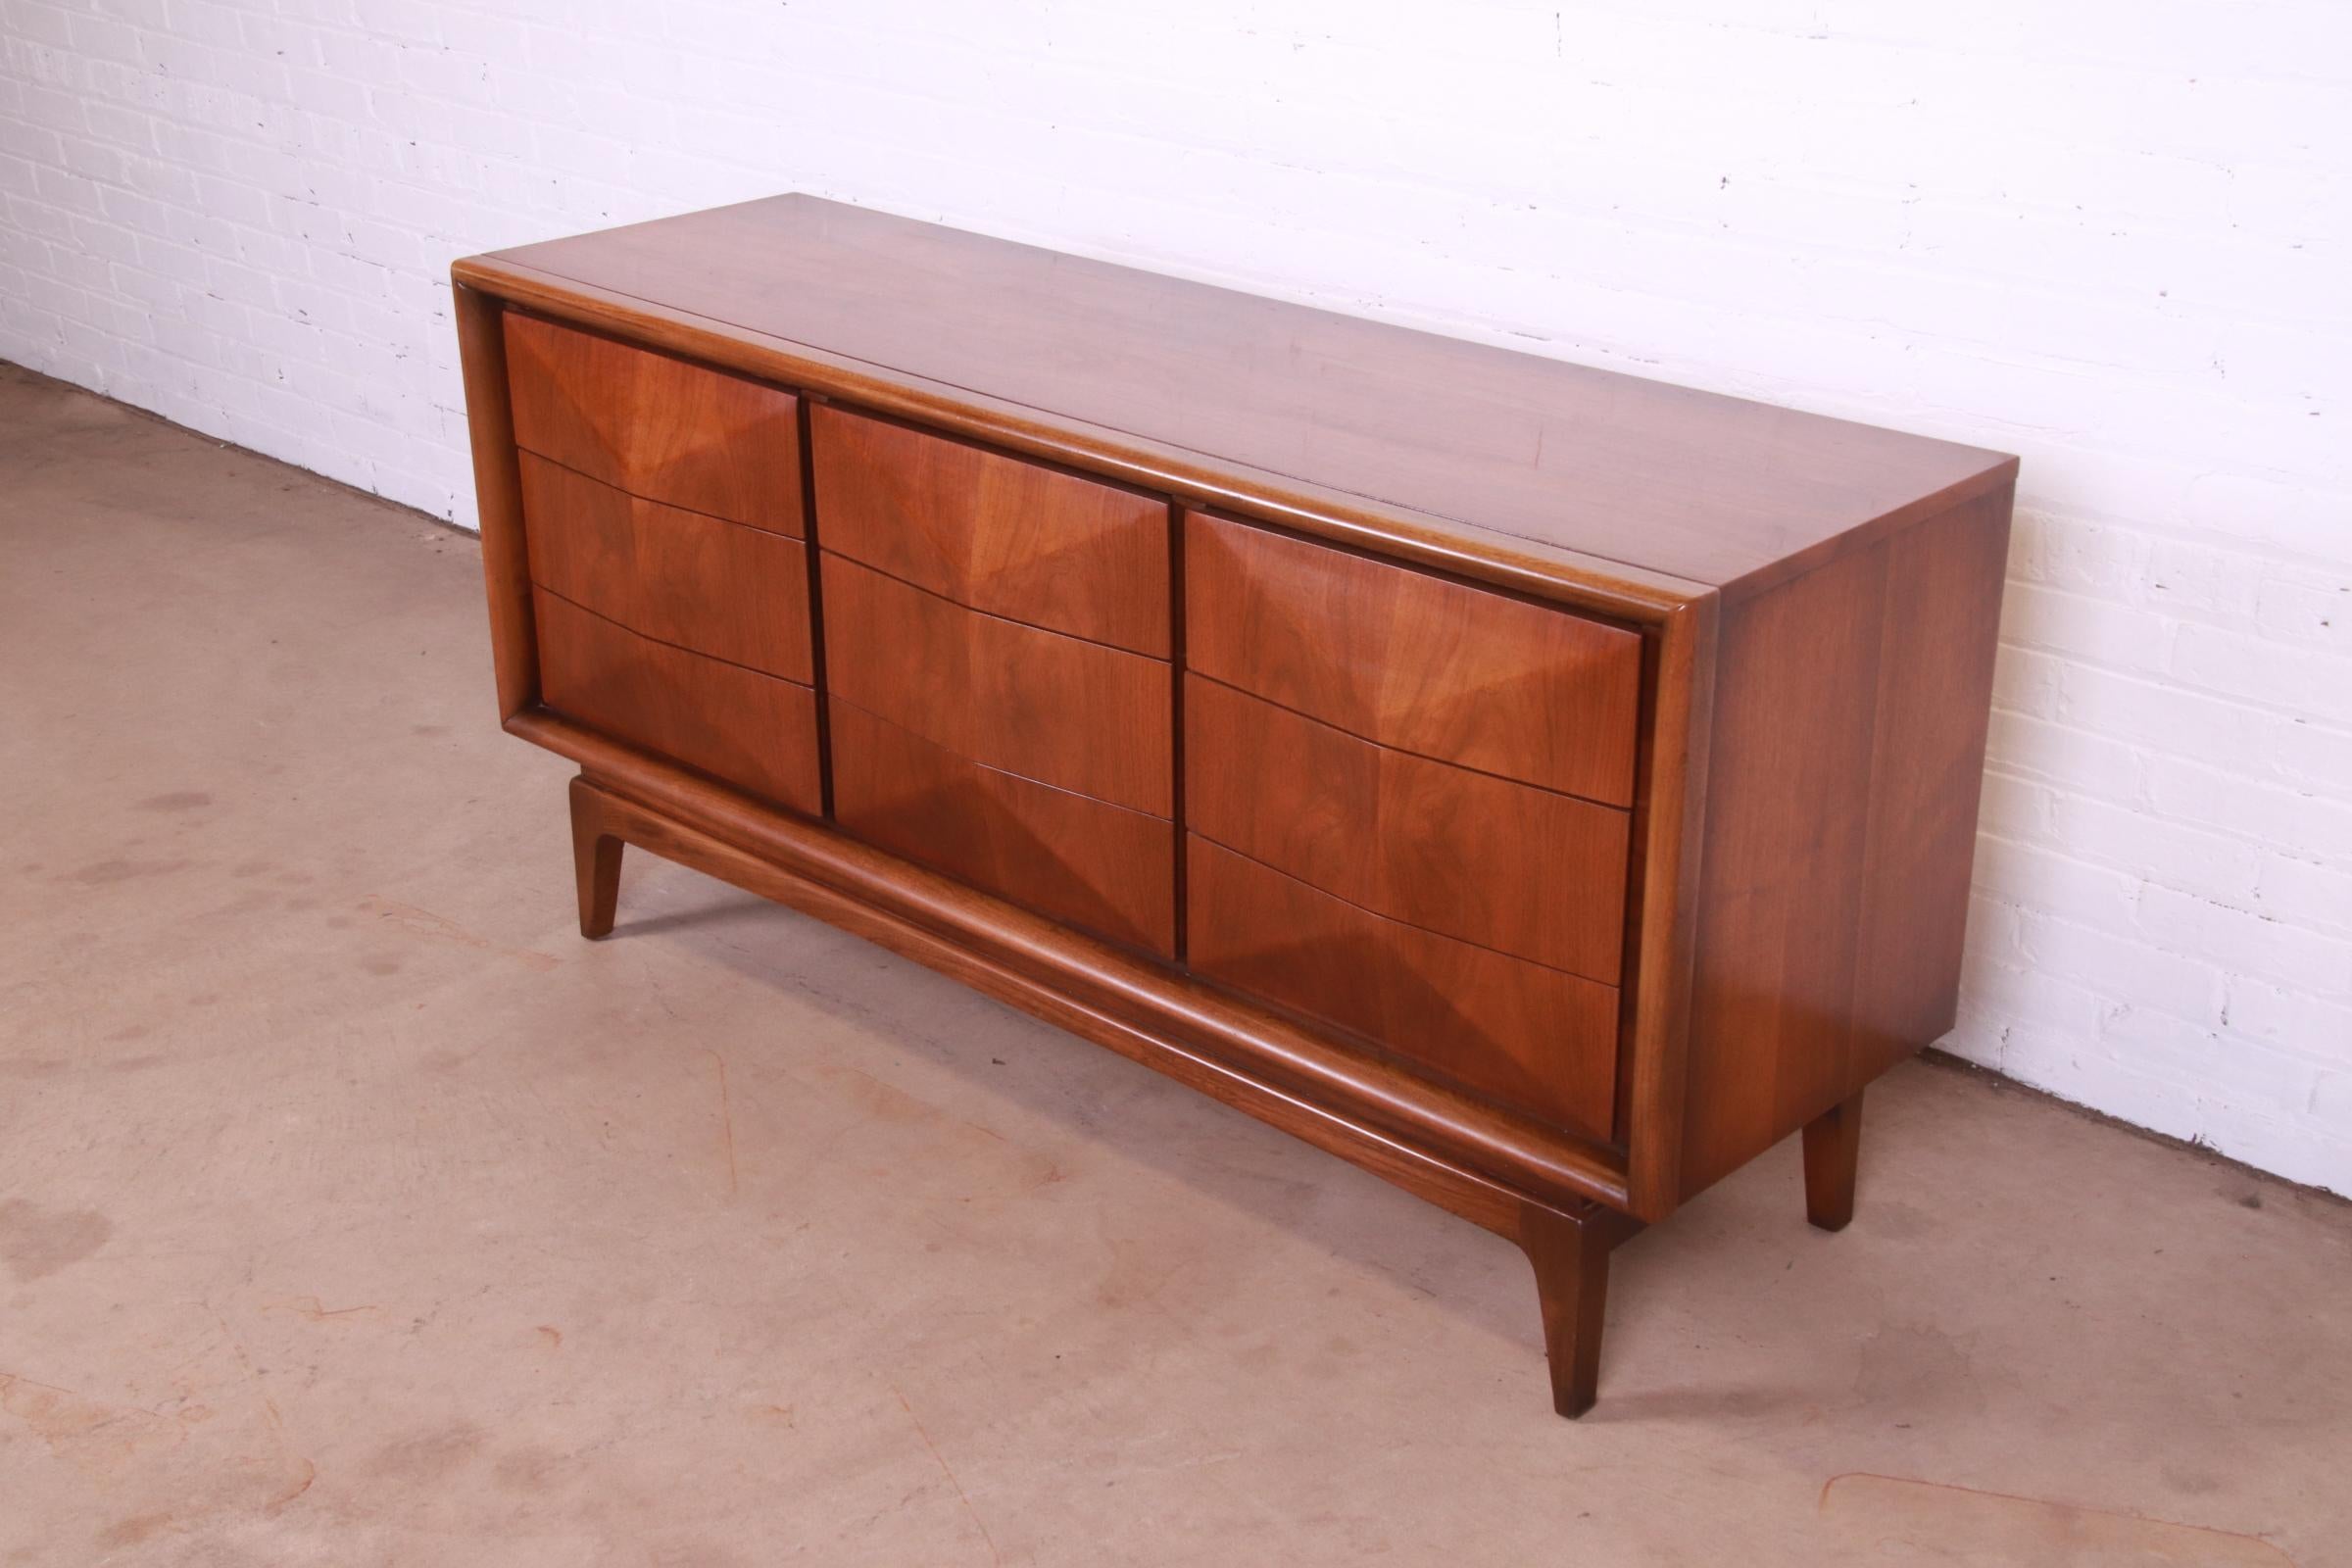 Mid-20th Century Mid-Century Modern Sculpted Walnut Diamond Front Dresser or Credenza by United